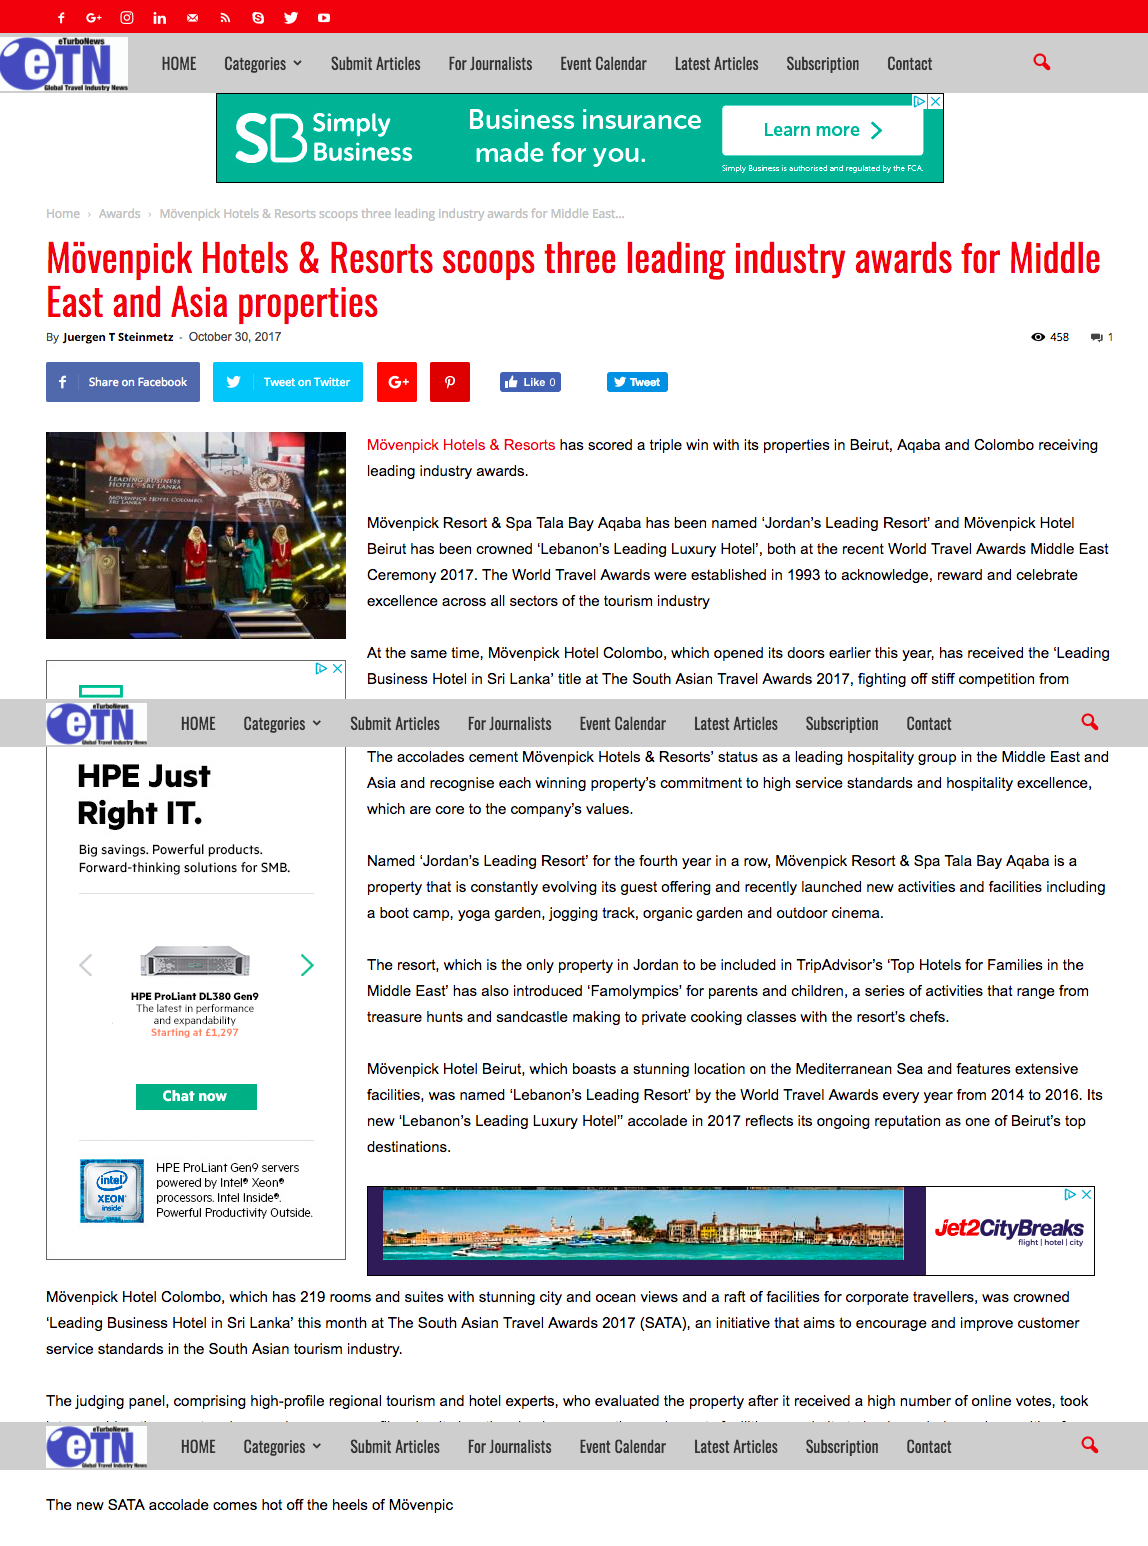 Mövenpick Hotels & Resorts scoops three leading industry awards for Middle East and Asia properties